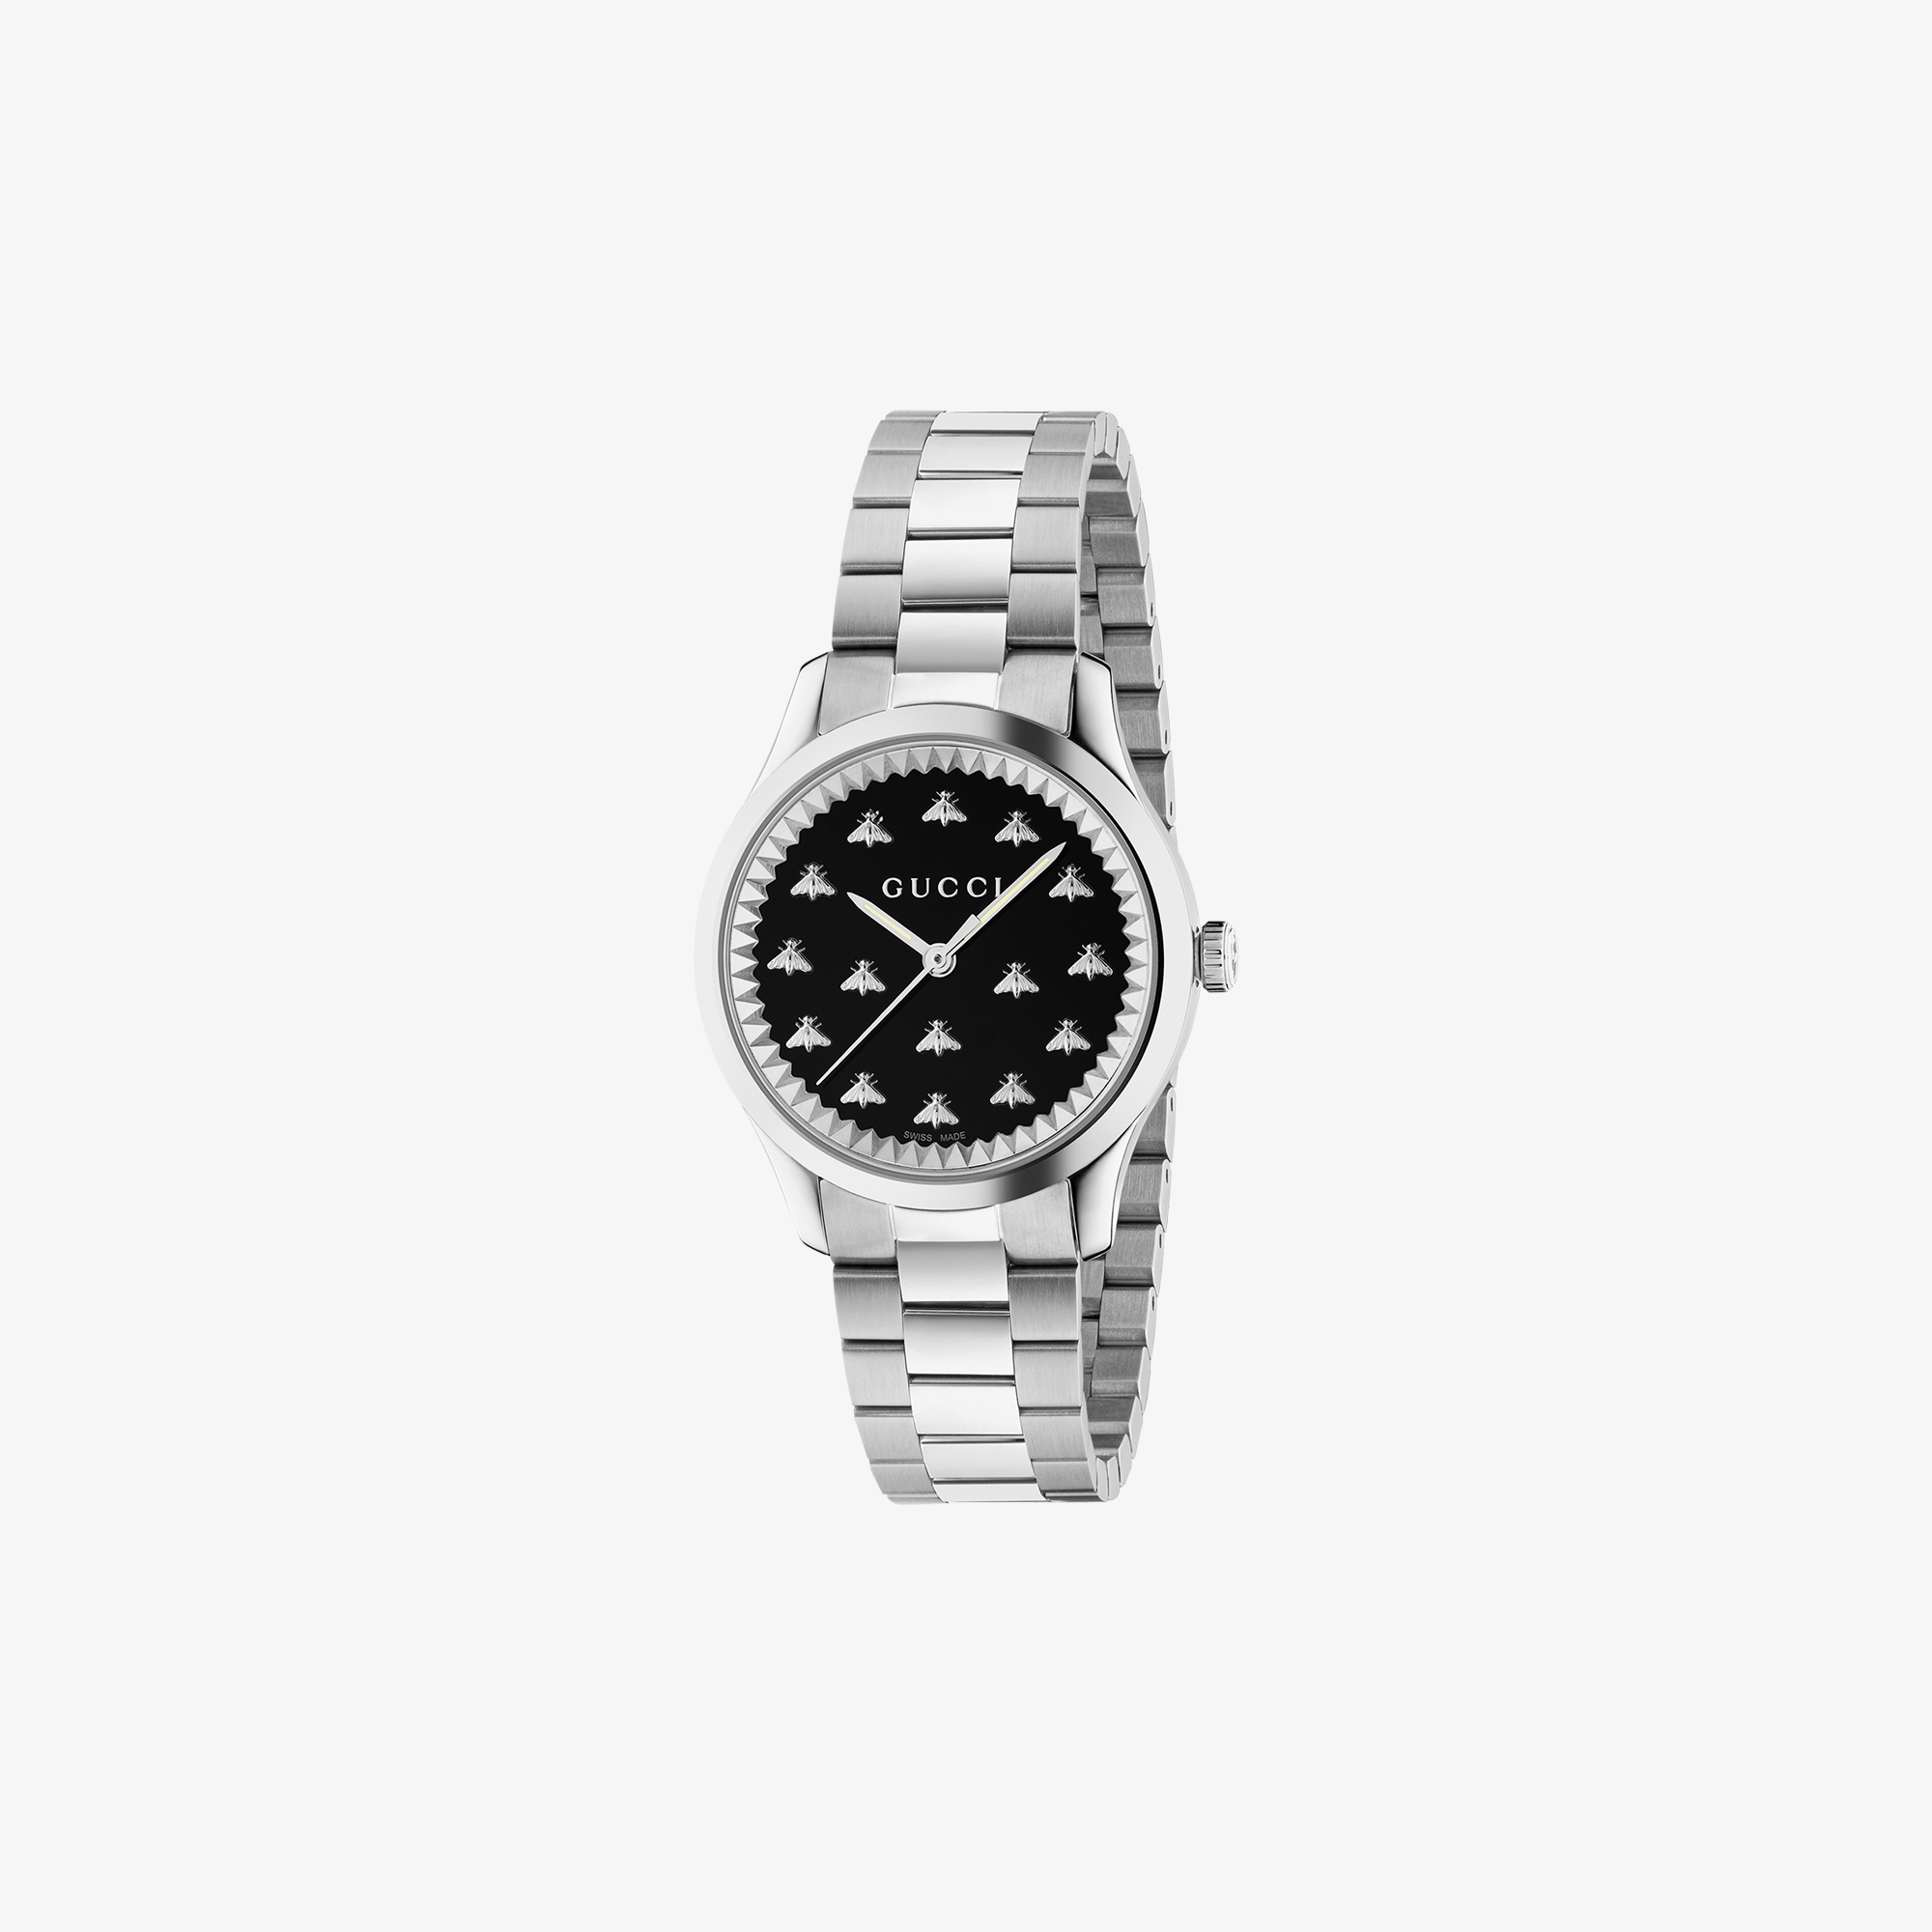 GUCCI G-TIMELESS WATCH WITH BEES